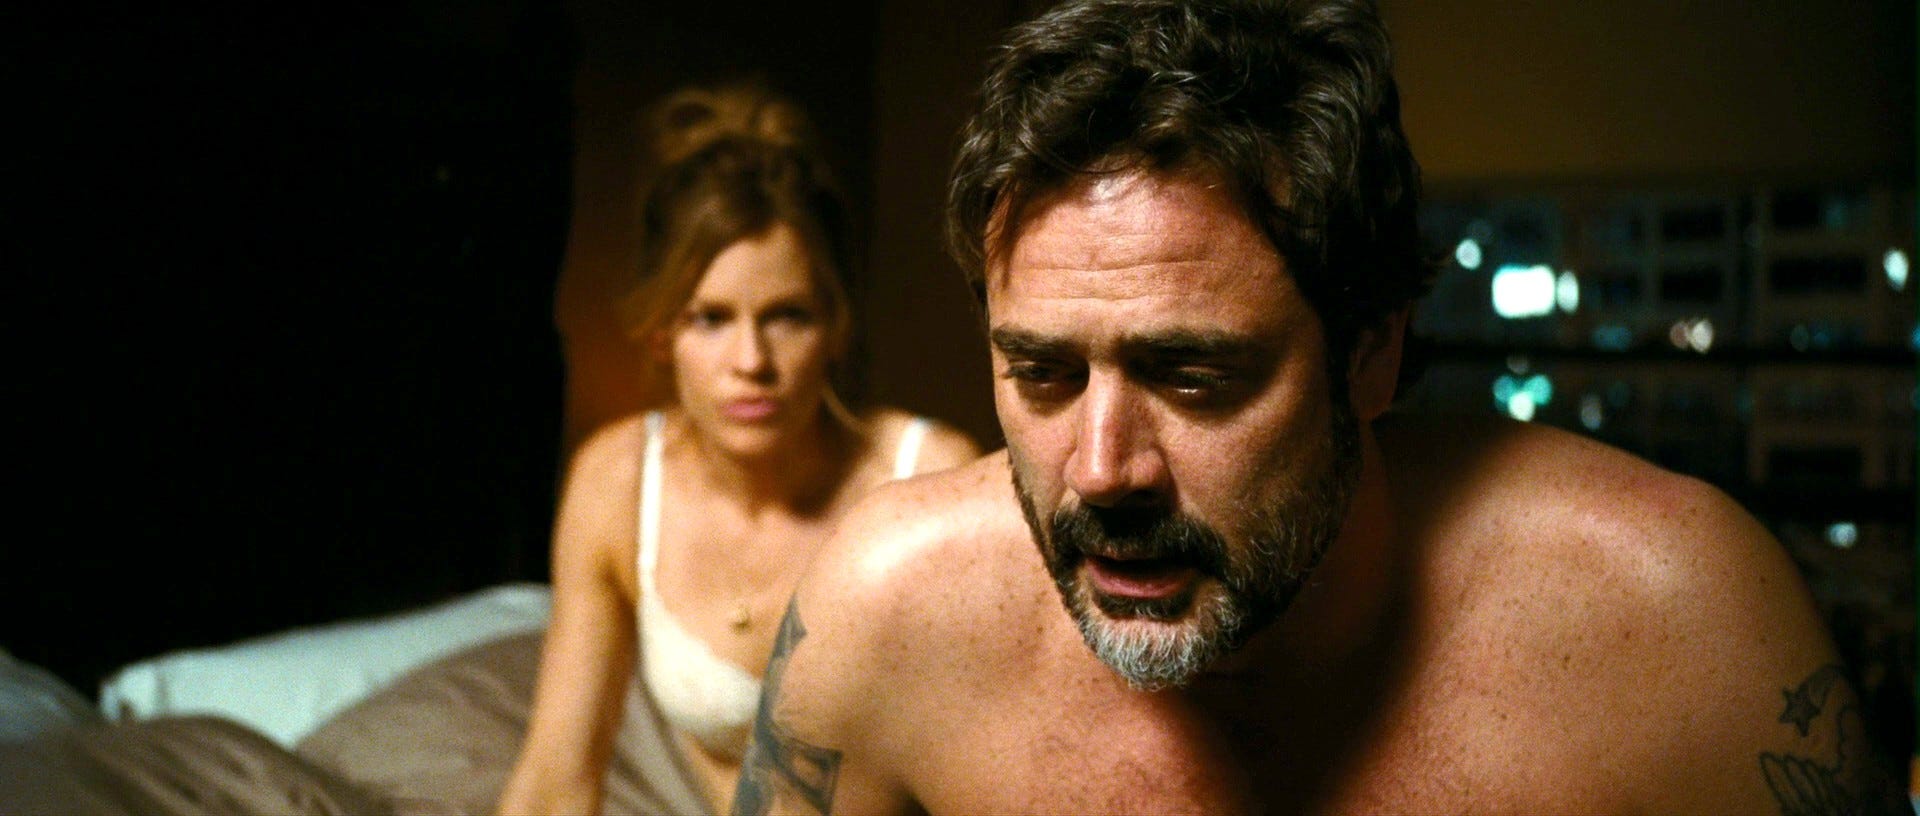 THE RESIDENT (2011) is an exploitative, voyeuristic embarrassment that  wastes a great cast | by Eric Langberg | Everything's Interesting | Medium